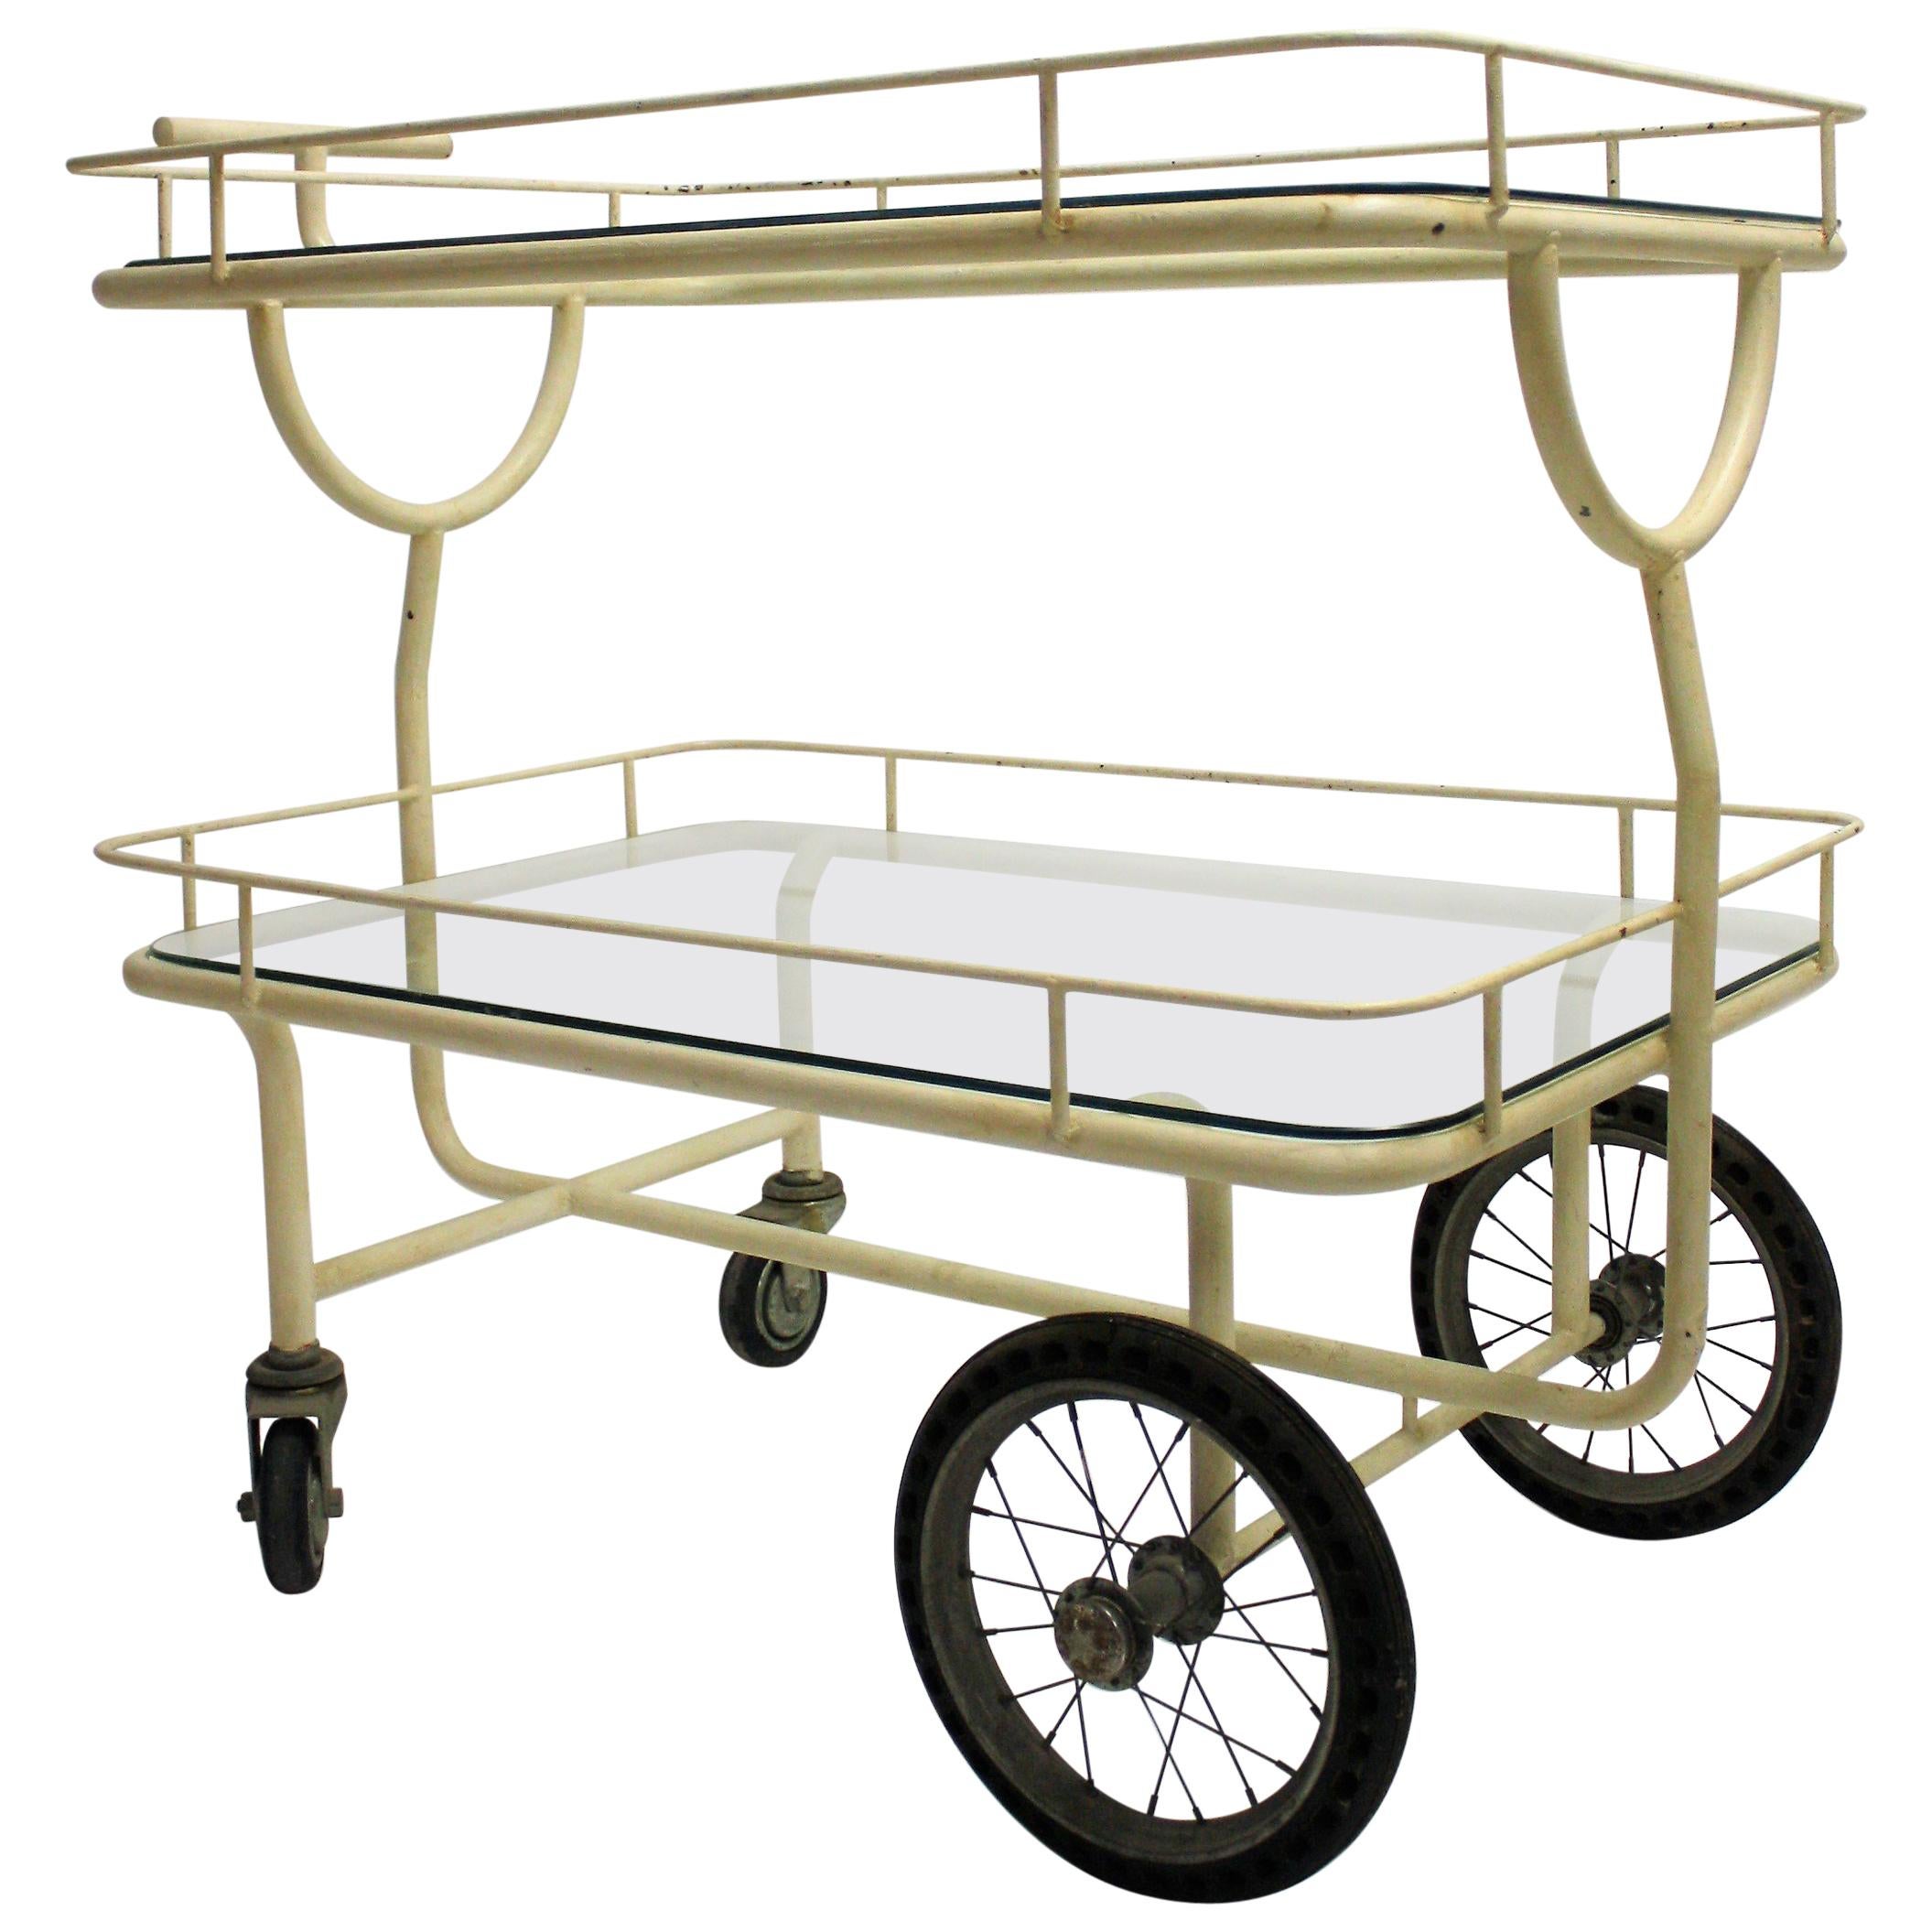 Antique Hospital Trolley, 1940s